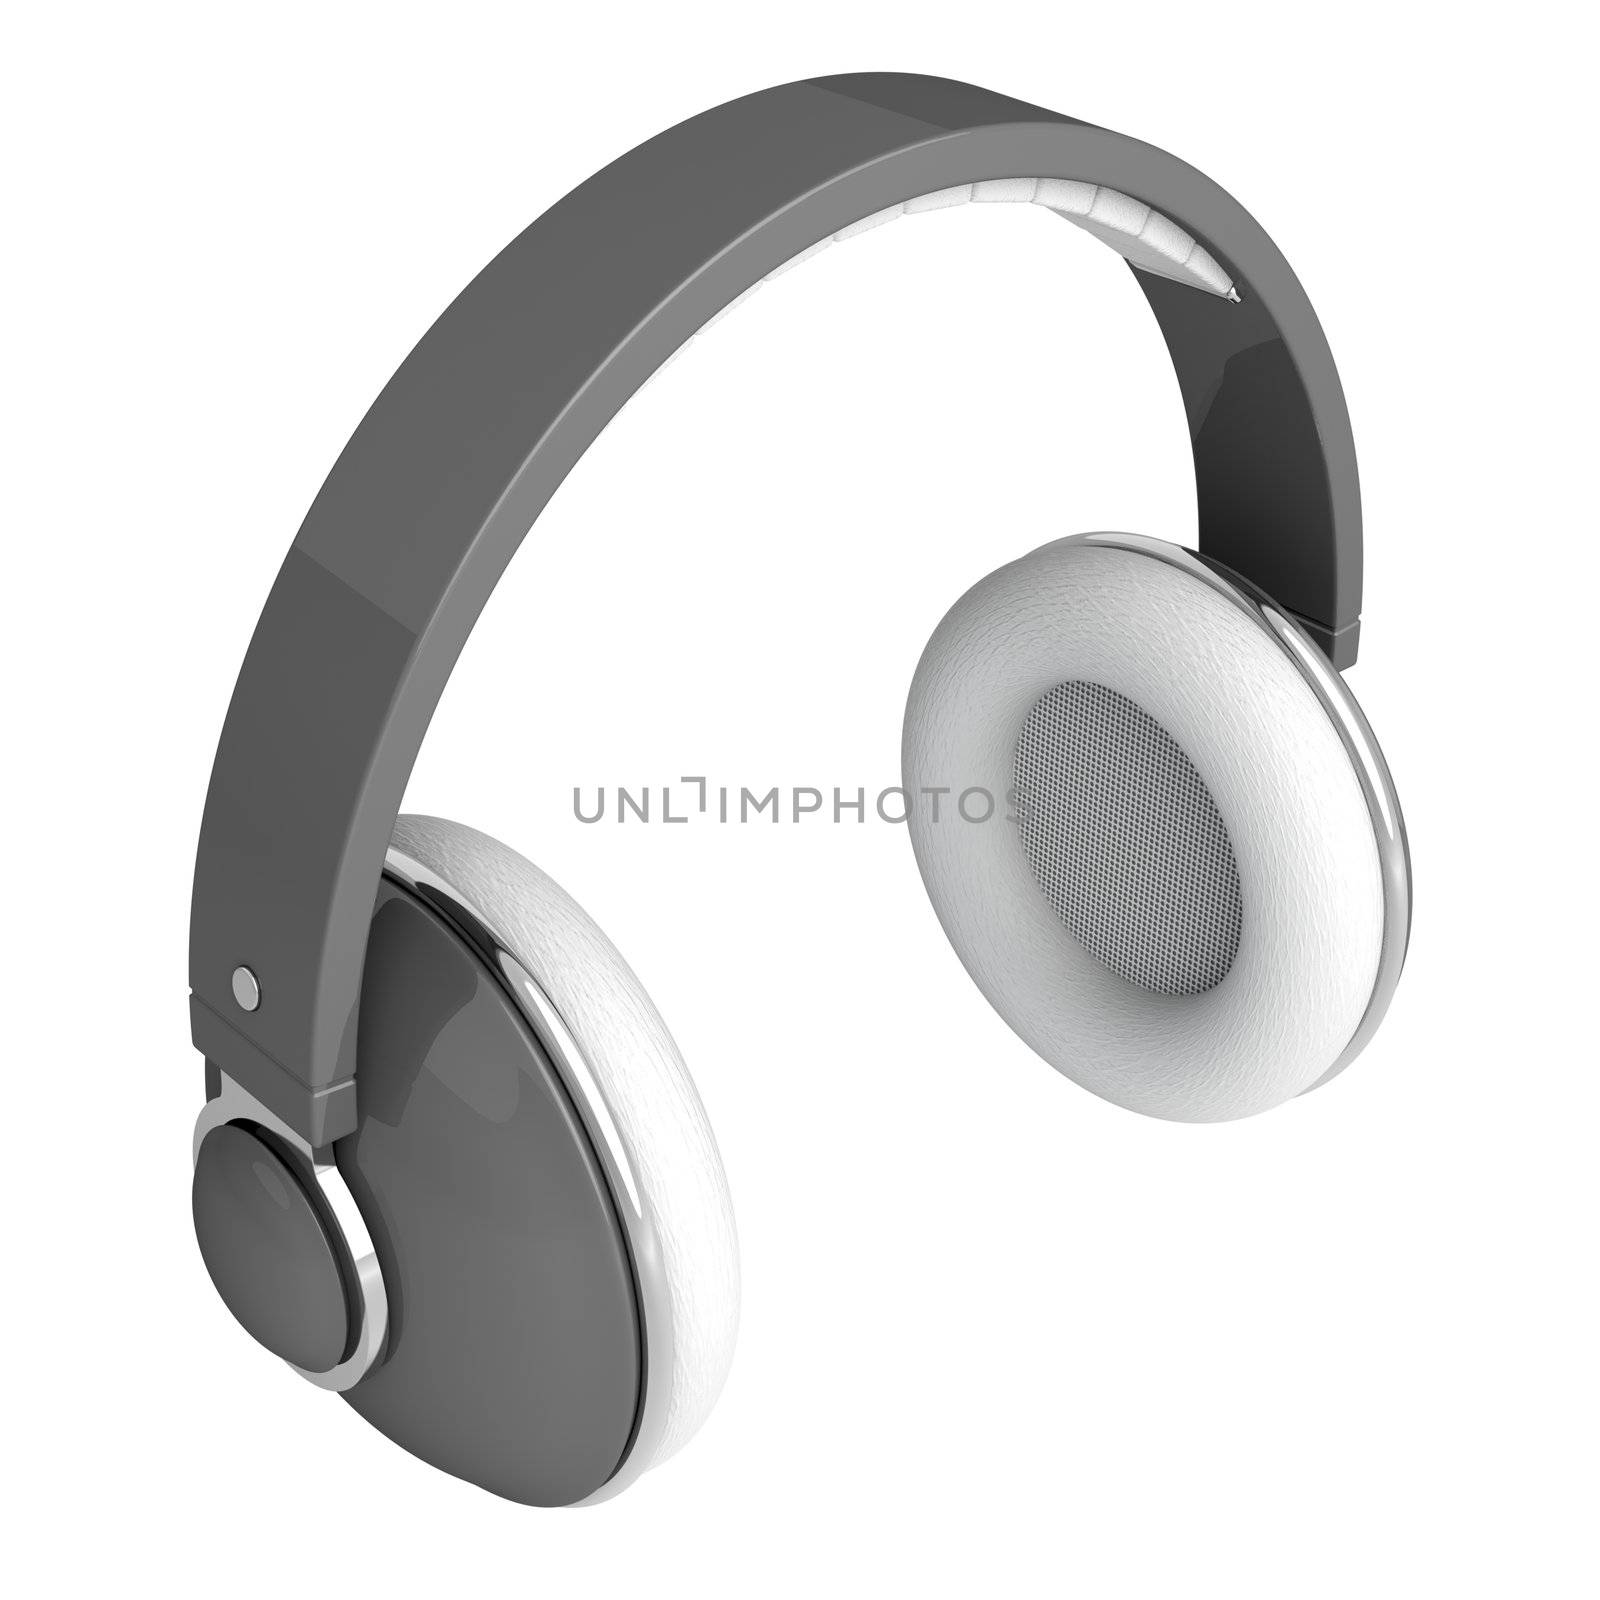 Gray headphones by magraphics